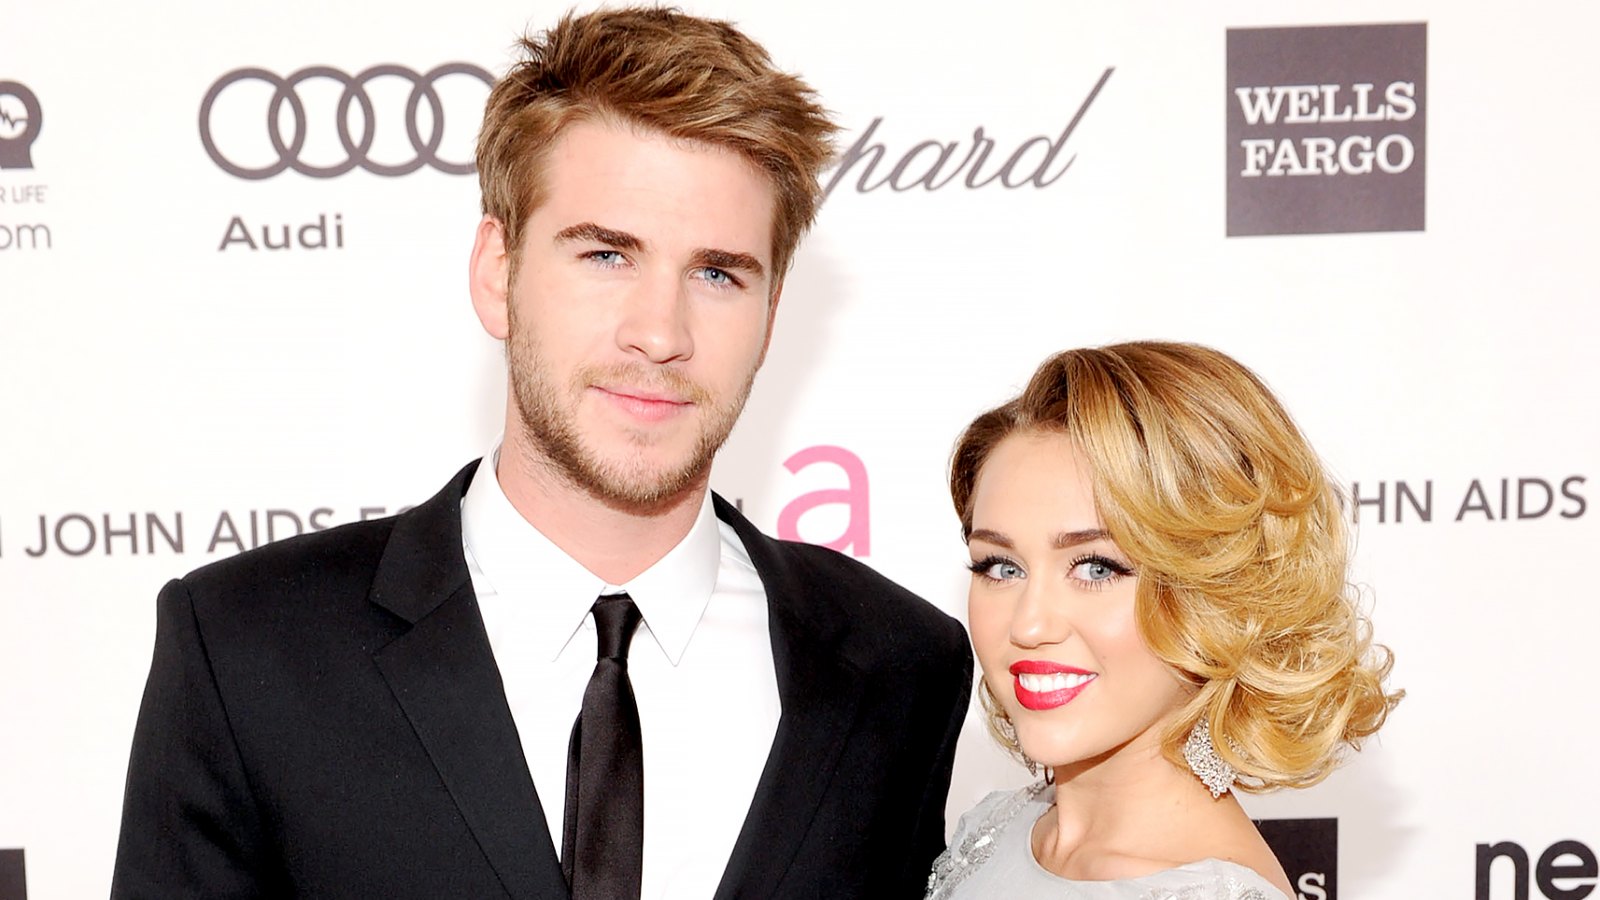 Liam Hemsworth and Miley Cyrus arrive at the 20th Annual Elton John AIDS Foundation Academy Awards Viewing Party at The City of West Hollywood Park on February 26, 2012 in Beverly Hills, California.